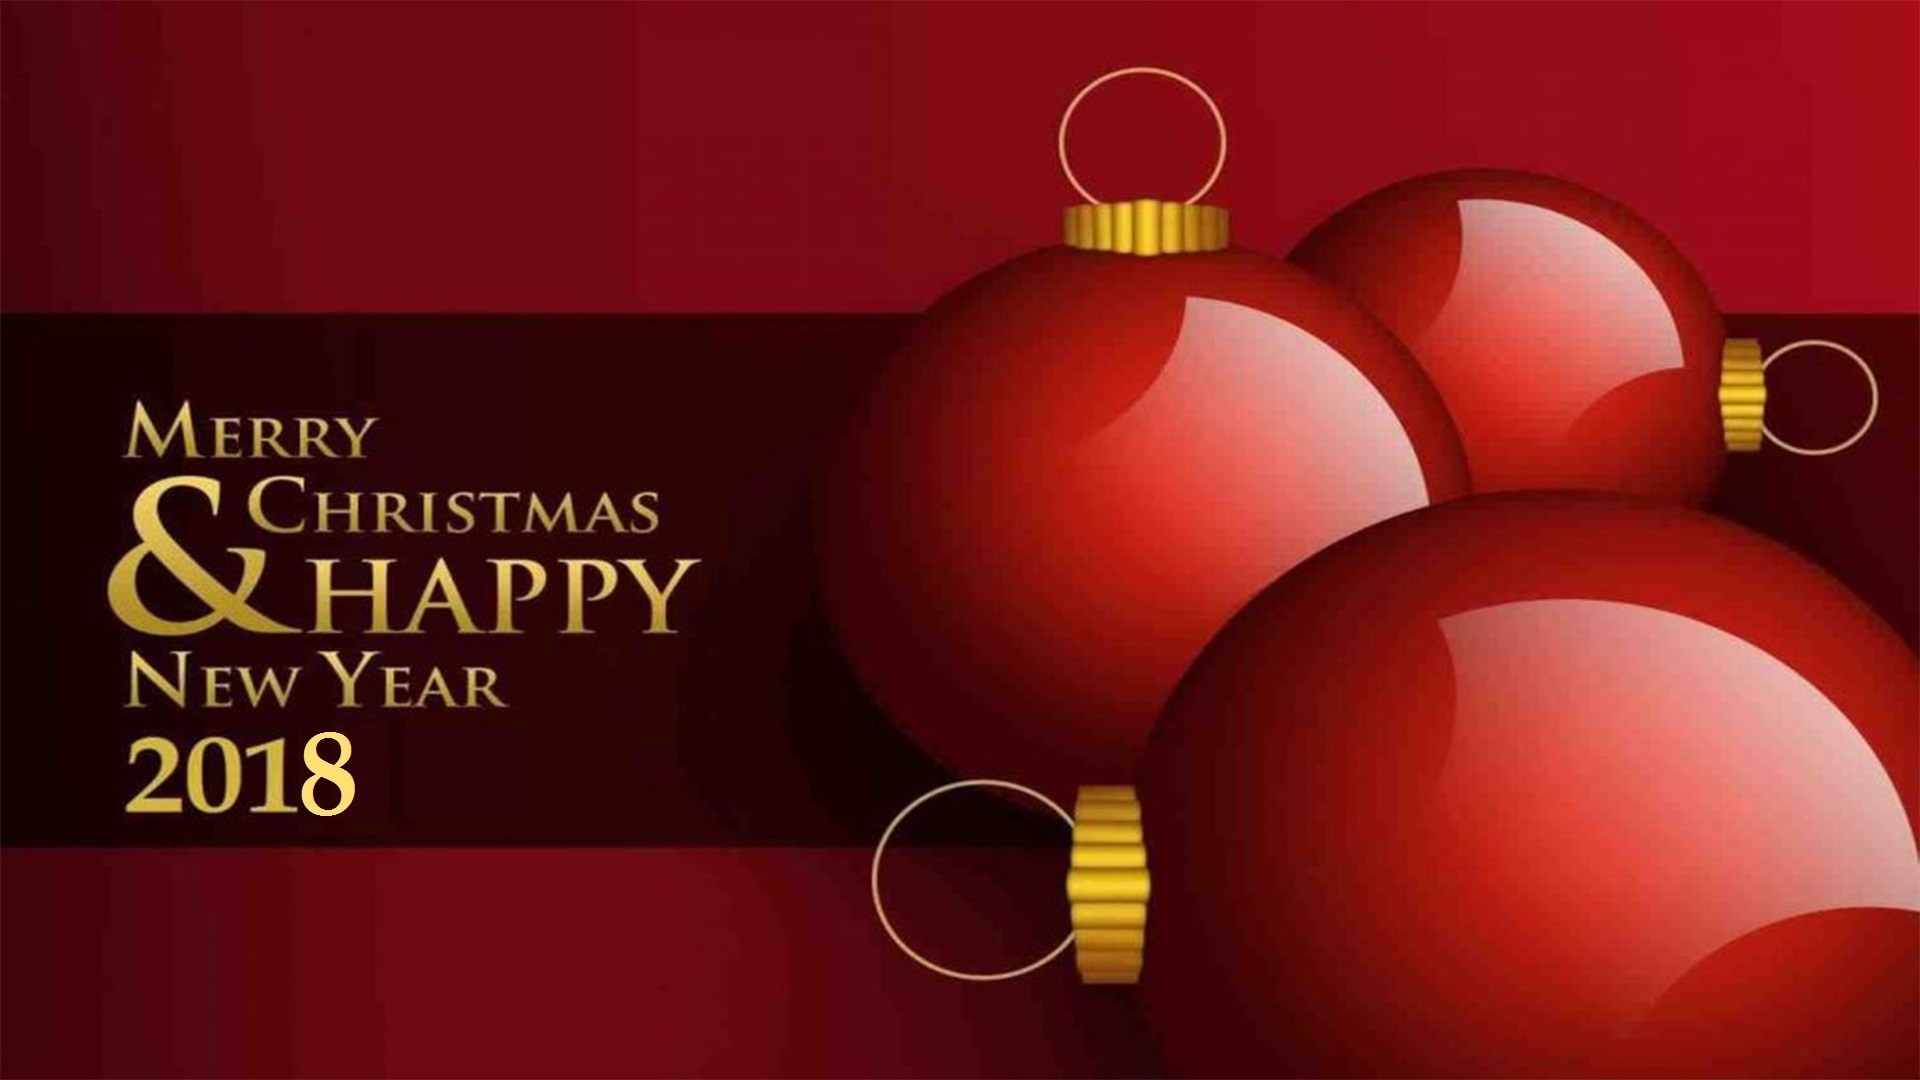 1920x1080 merry christmas happy new year 2018 images hd pictures